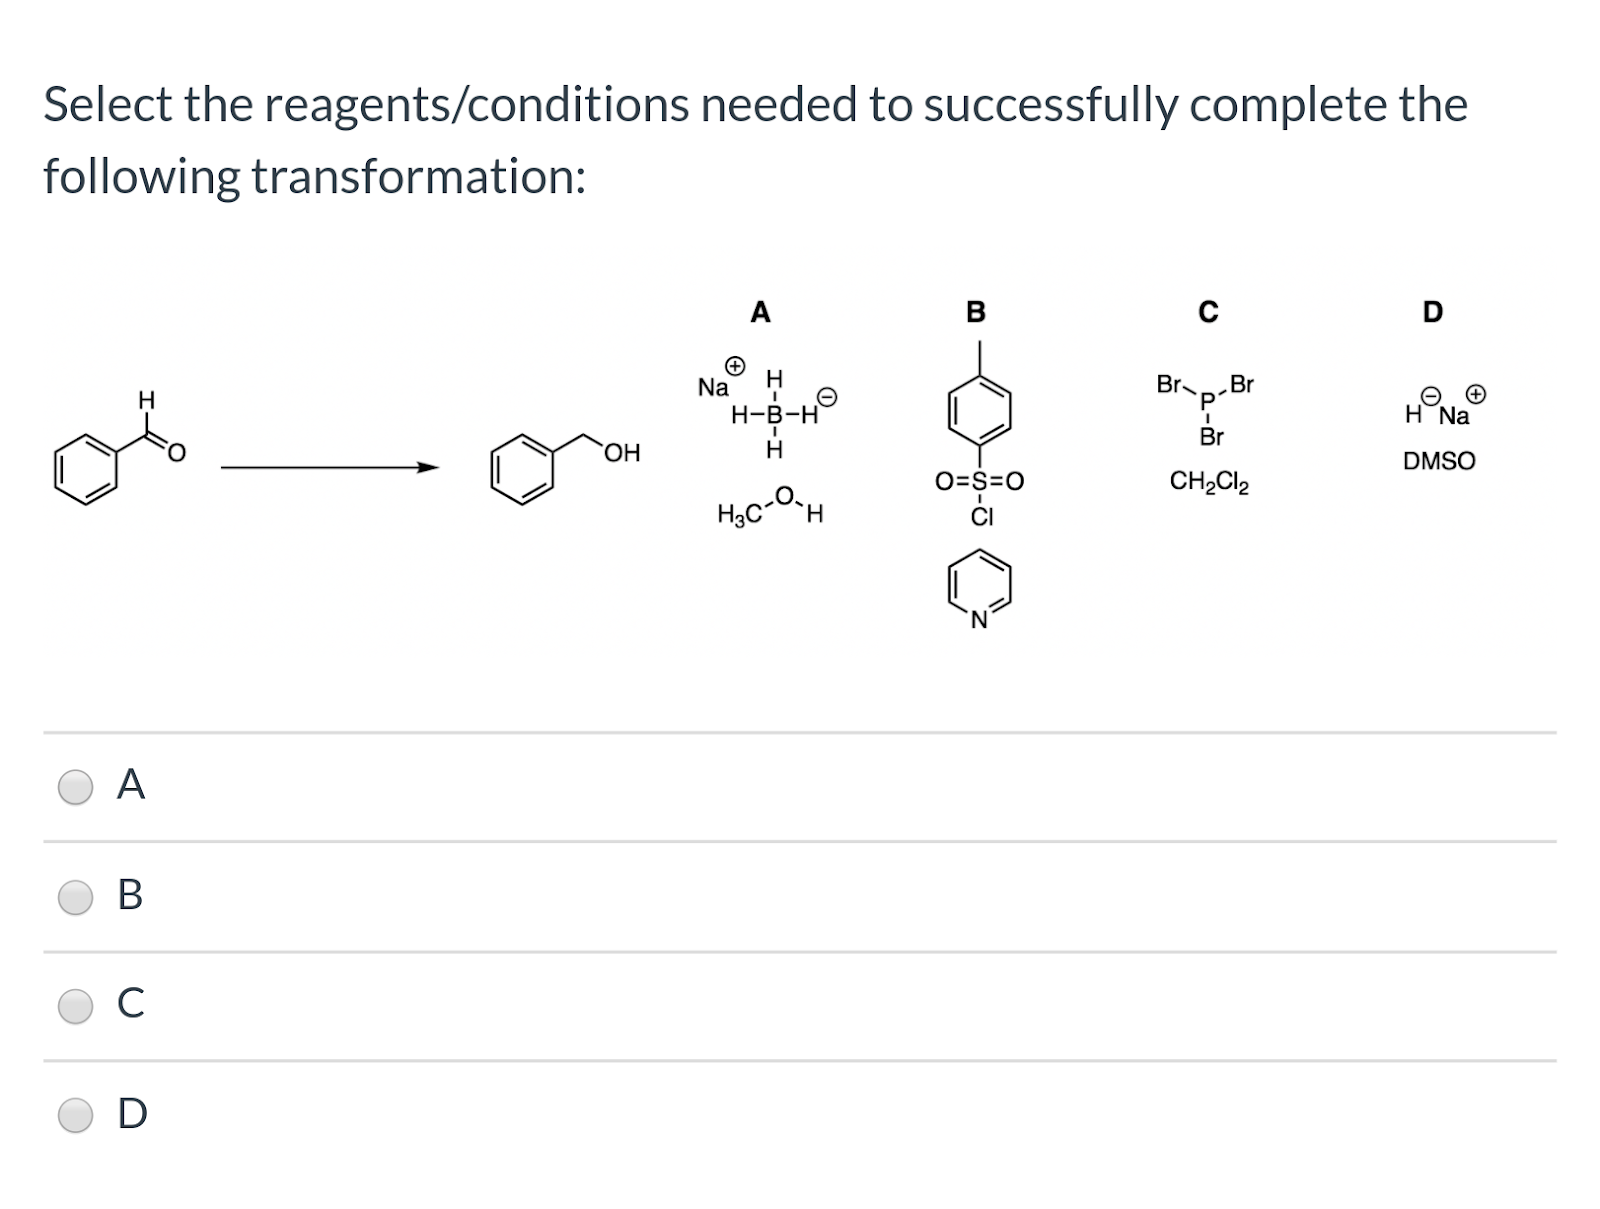 Select the reagents/conditions needed to successfully complete the following transformation: Na Ho Bro-Br H-B-Hº HONO DMSO =